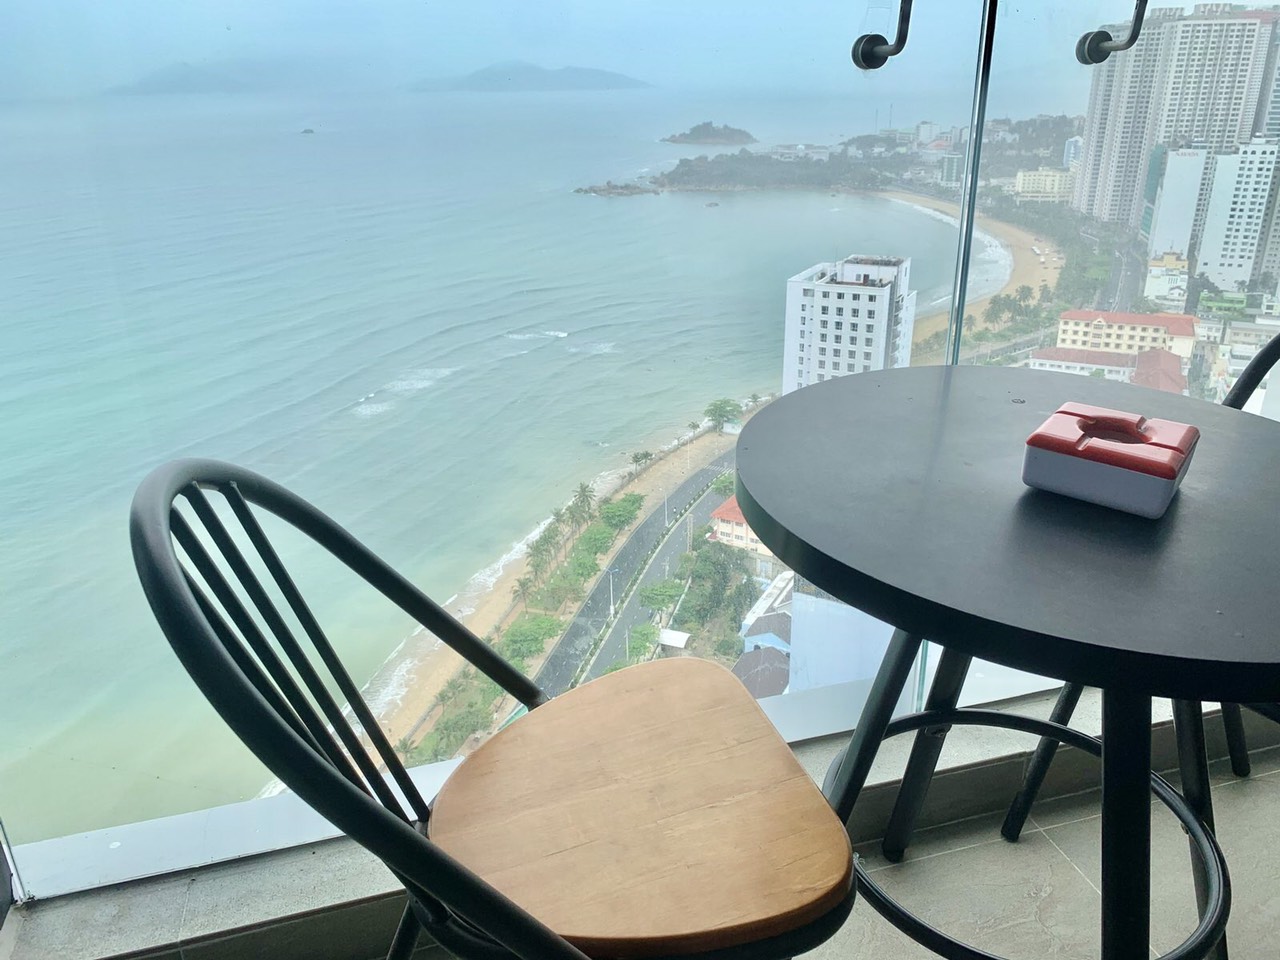 Scenia Bay Nha Trang for rent | One bedroom plus | 12 million VND